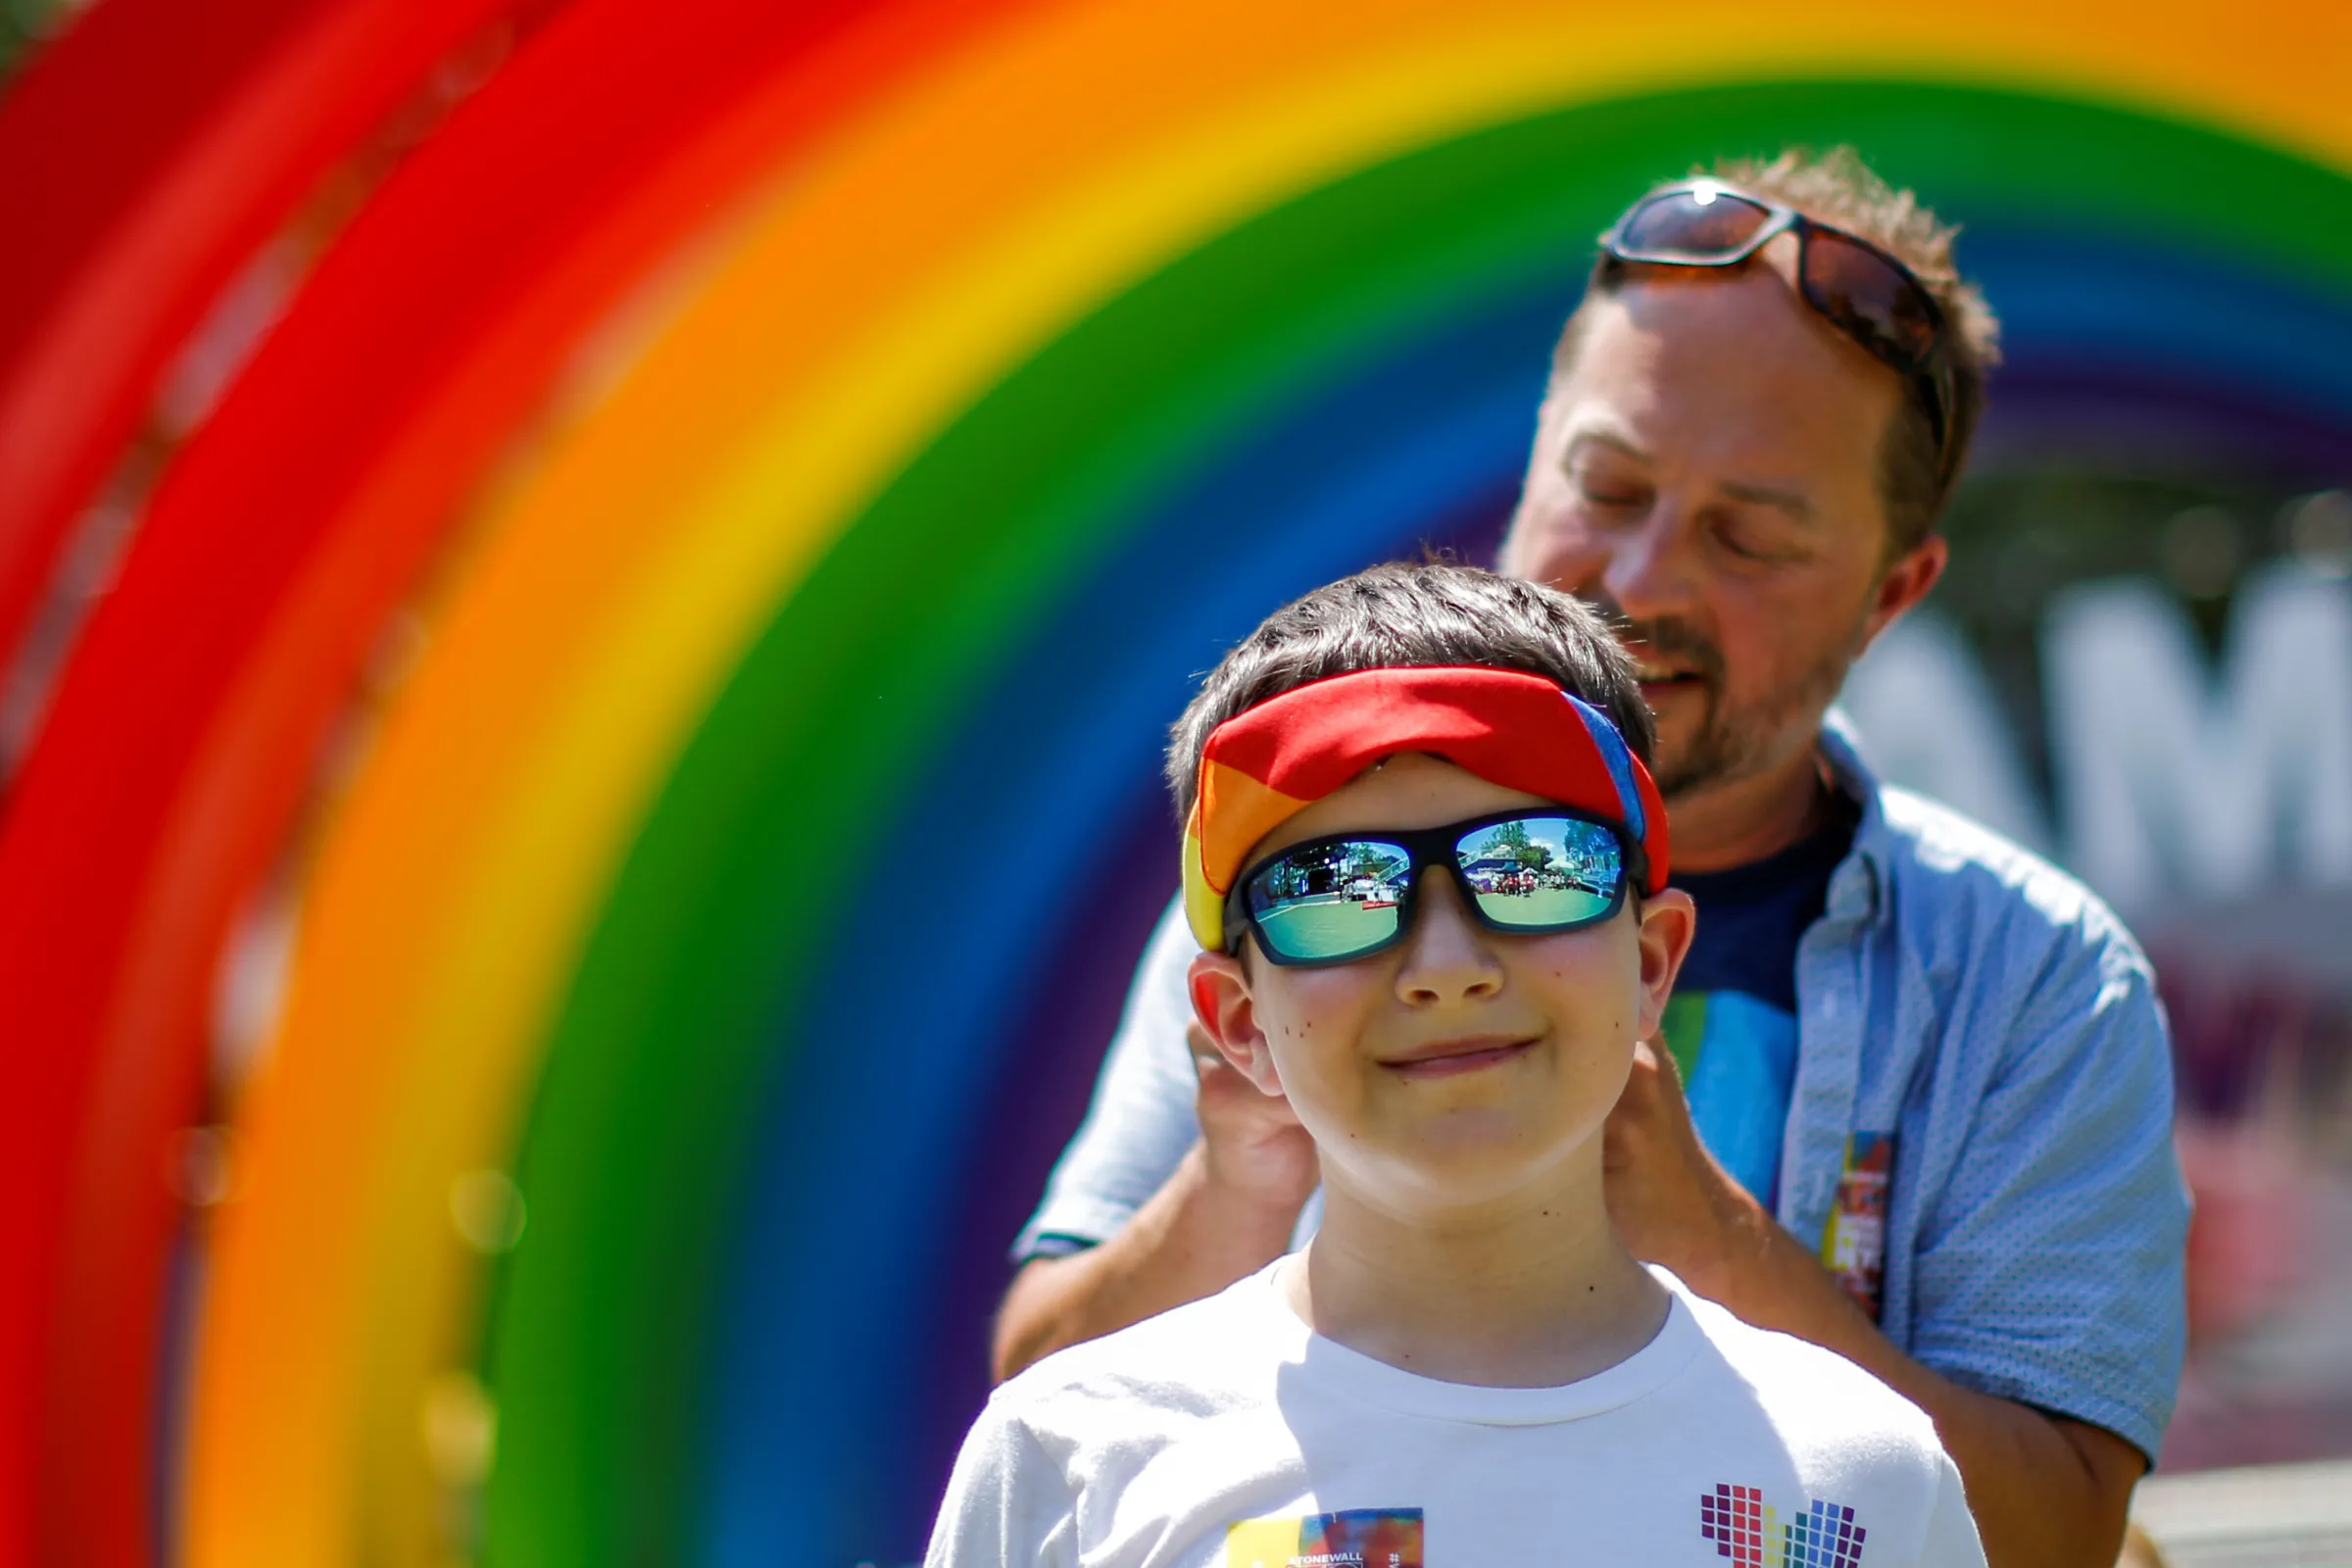 A man ties a rainbow headscarf around a boy as they stand in front of a giant rainbow